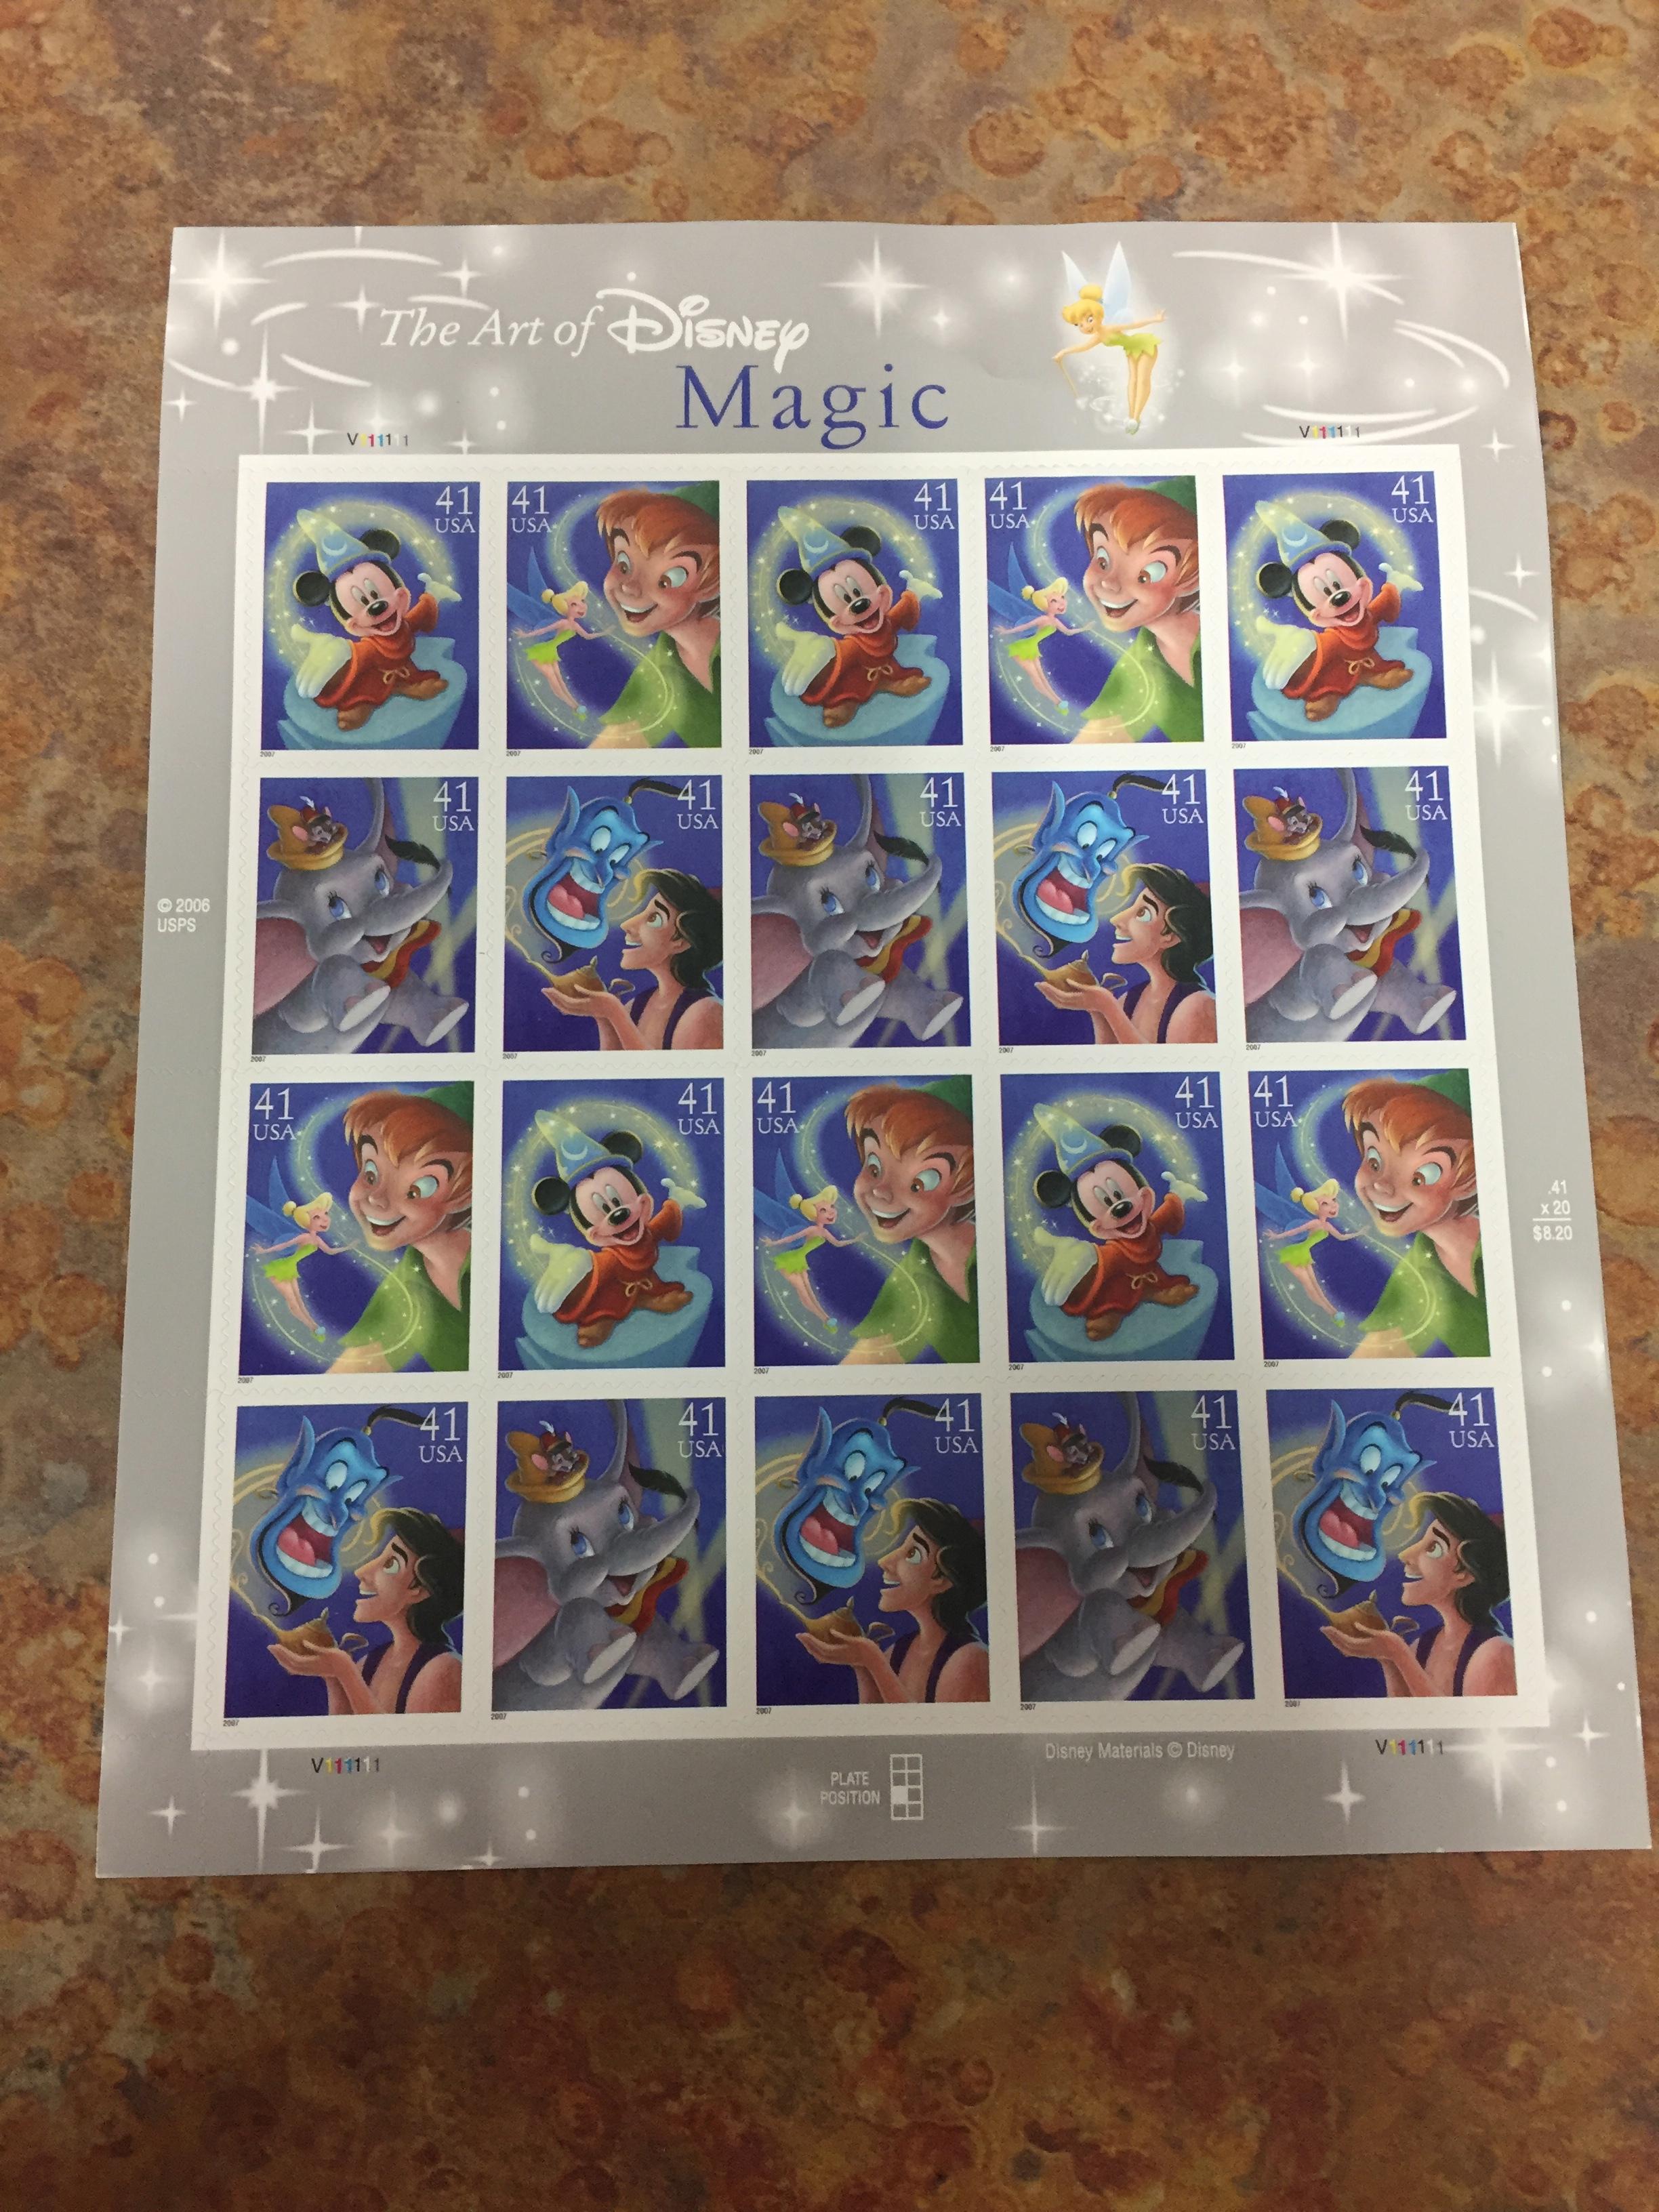 Unused Uncut Sheet of 20 USA The Art of Disney Magic Stamps - $8.20 Face Value